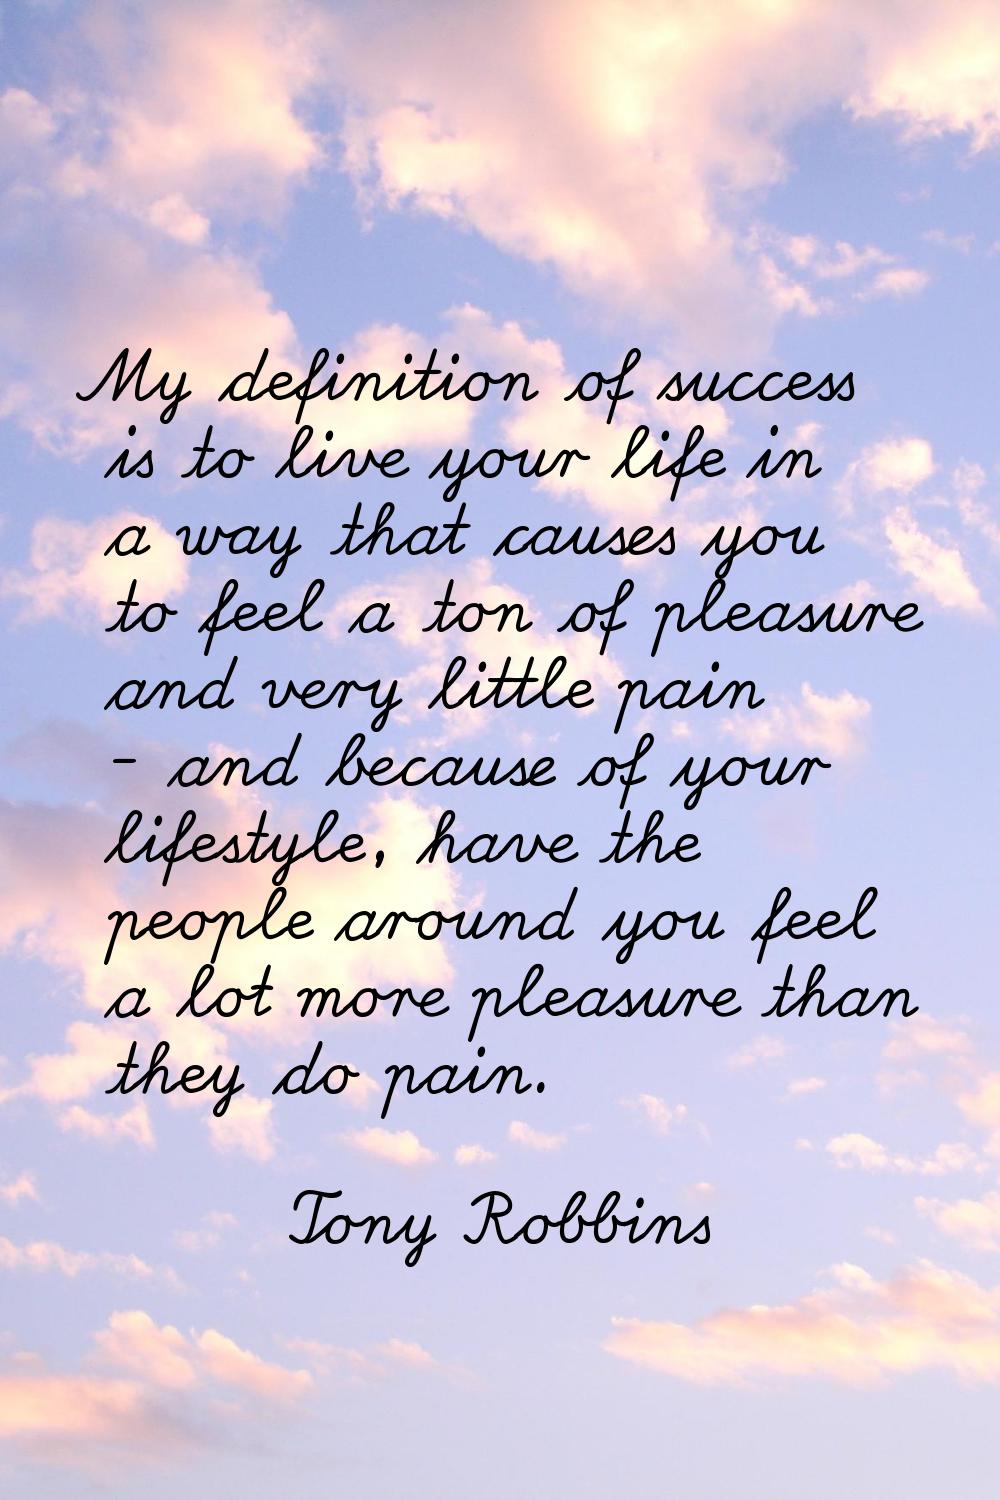 My definition of success is to live your life in a way that causes you to feel a ton of pleasure an